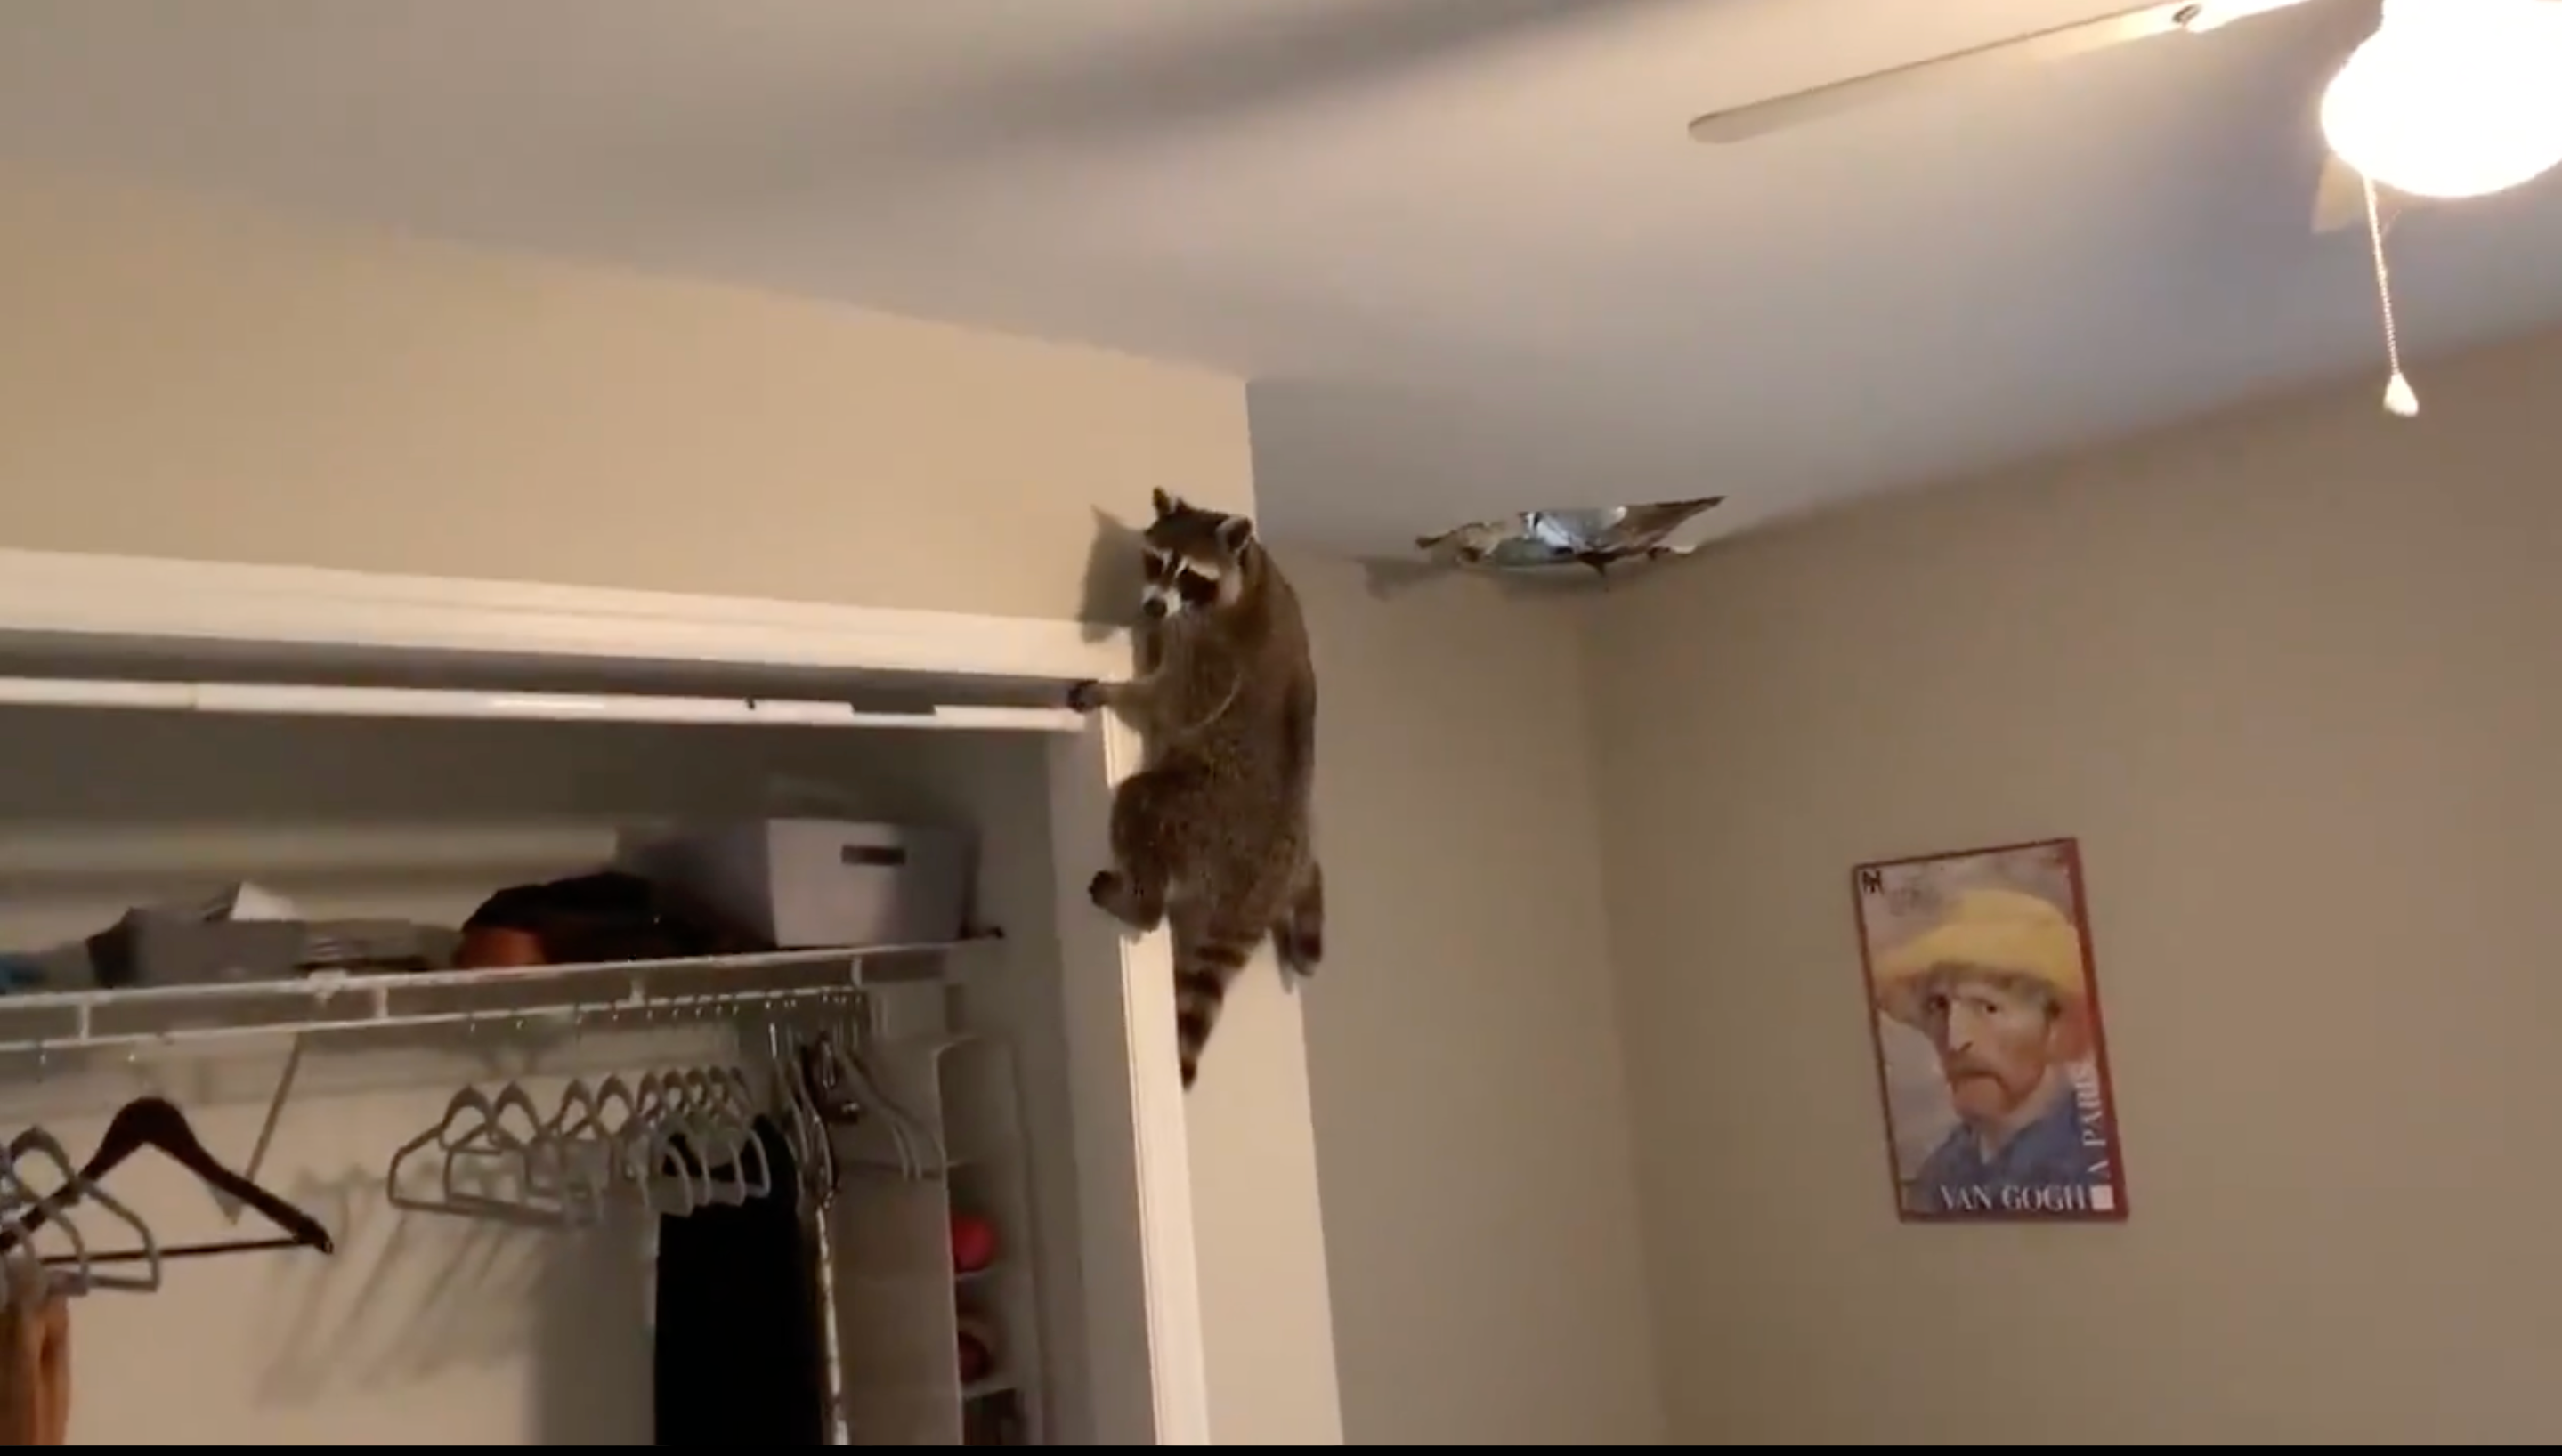 Haley Illiff shared live updates of the process of removing a family of raccoons infesting her Florida apartment on Twitter